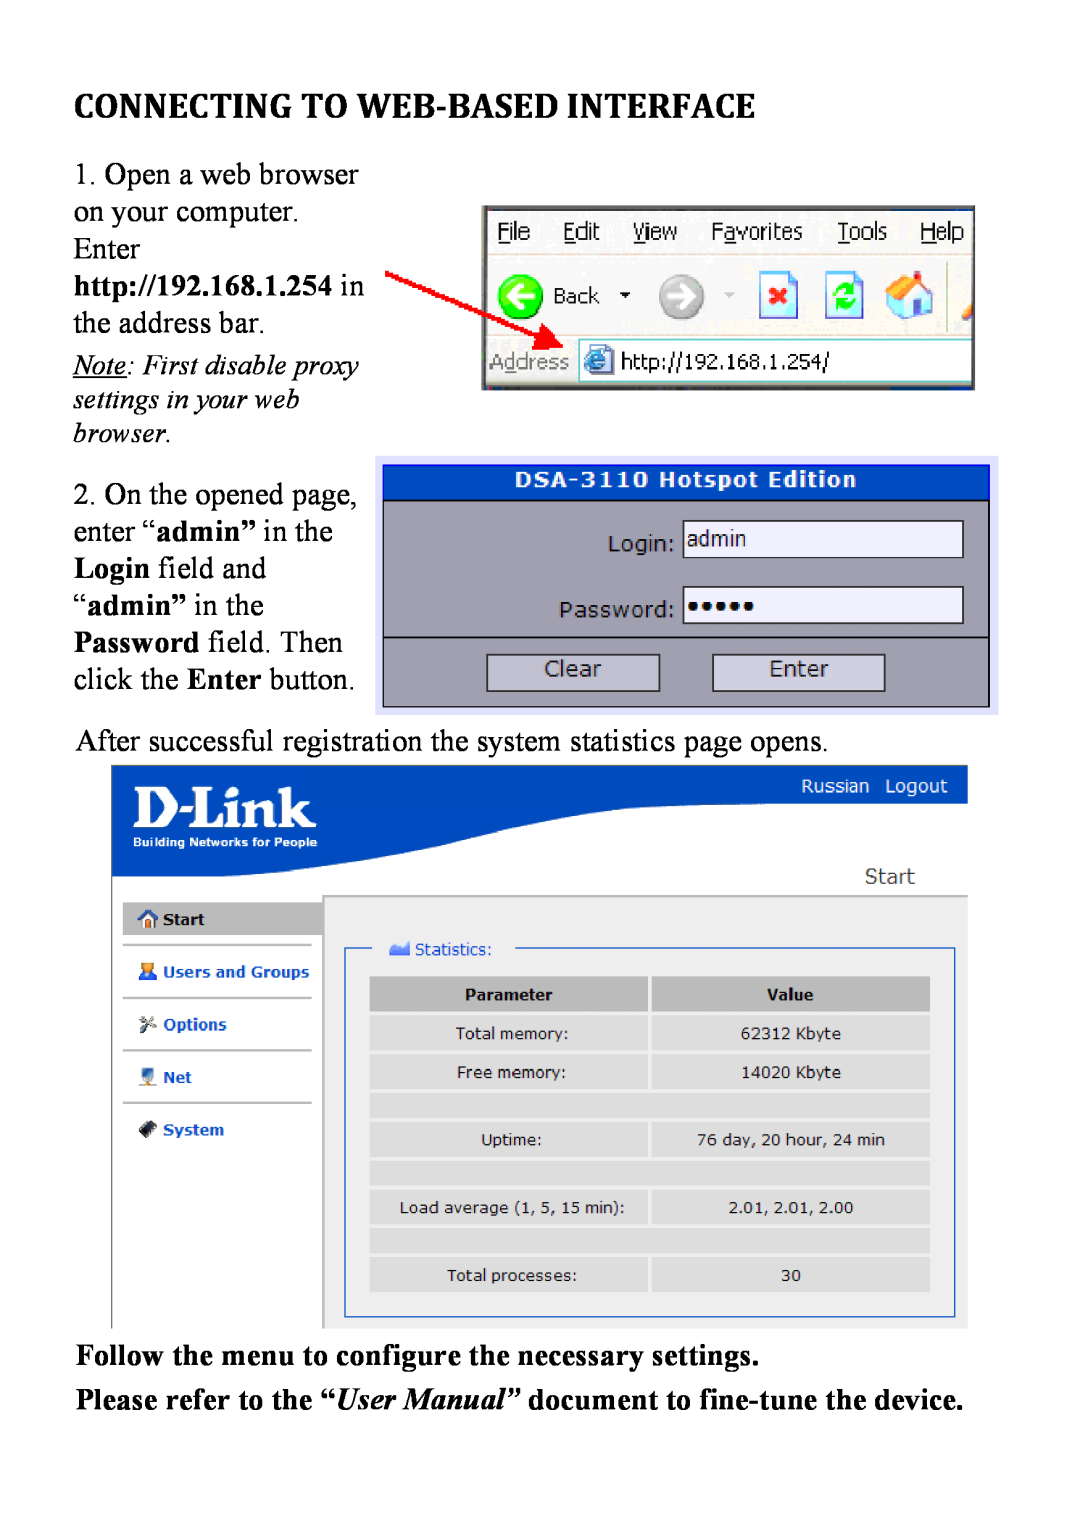 D-Link DSA-3110 manual Connecting To Web-Based Interface, Follow the menu to configure the necessary settings 